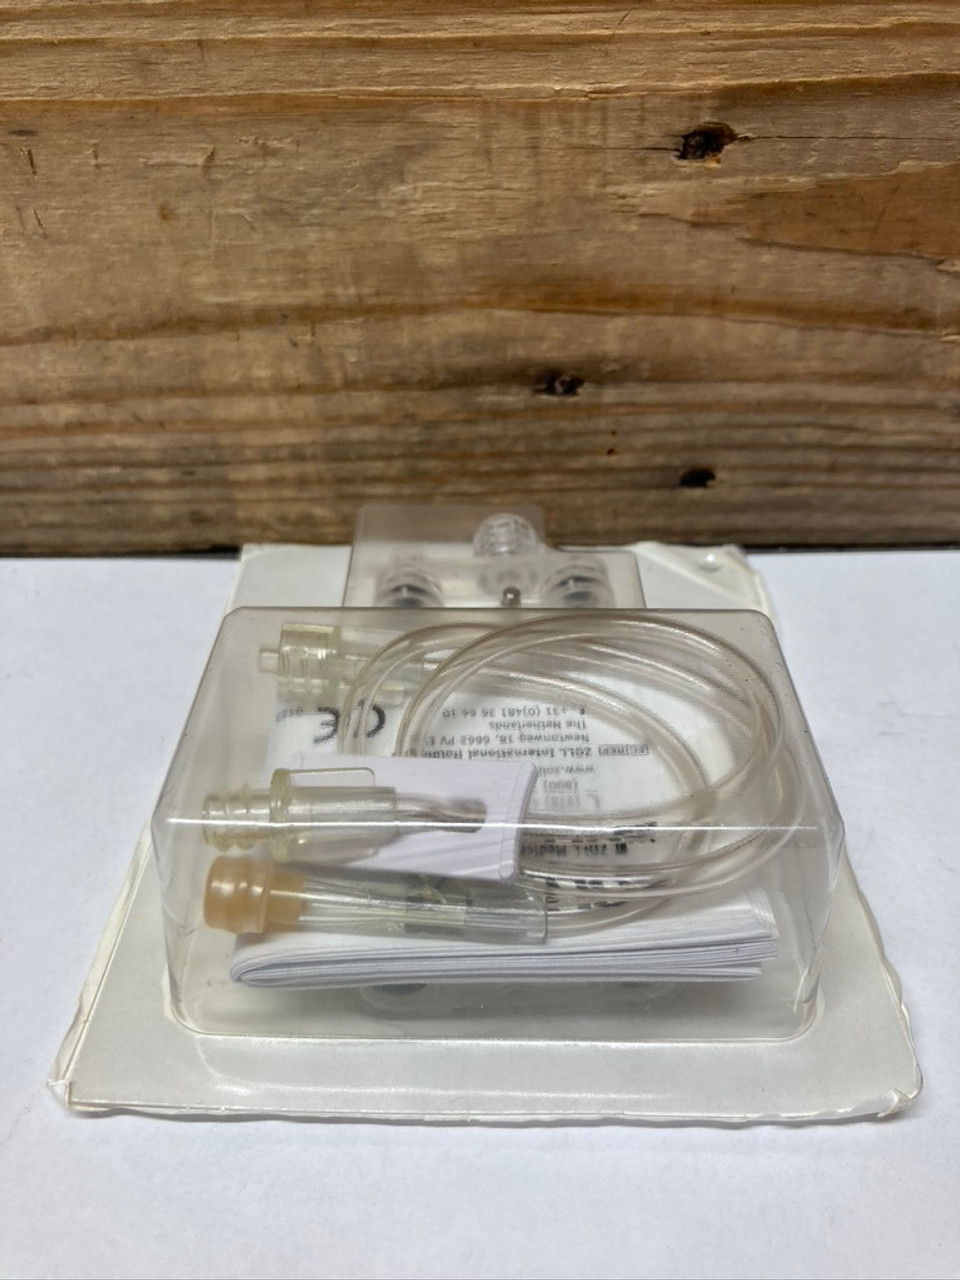 Crystalloid and Colloid Pump Cartridge and IV Set 8700-0601-01 Zoll